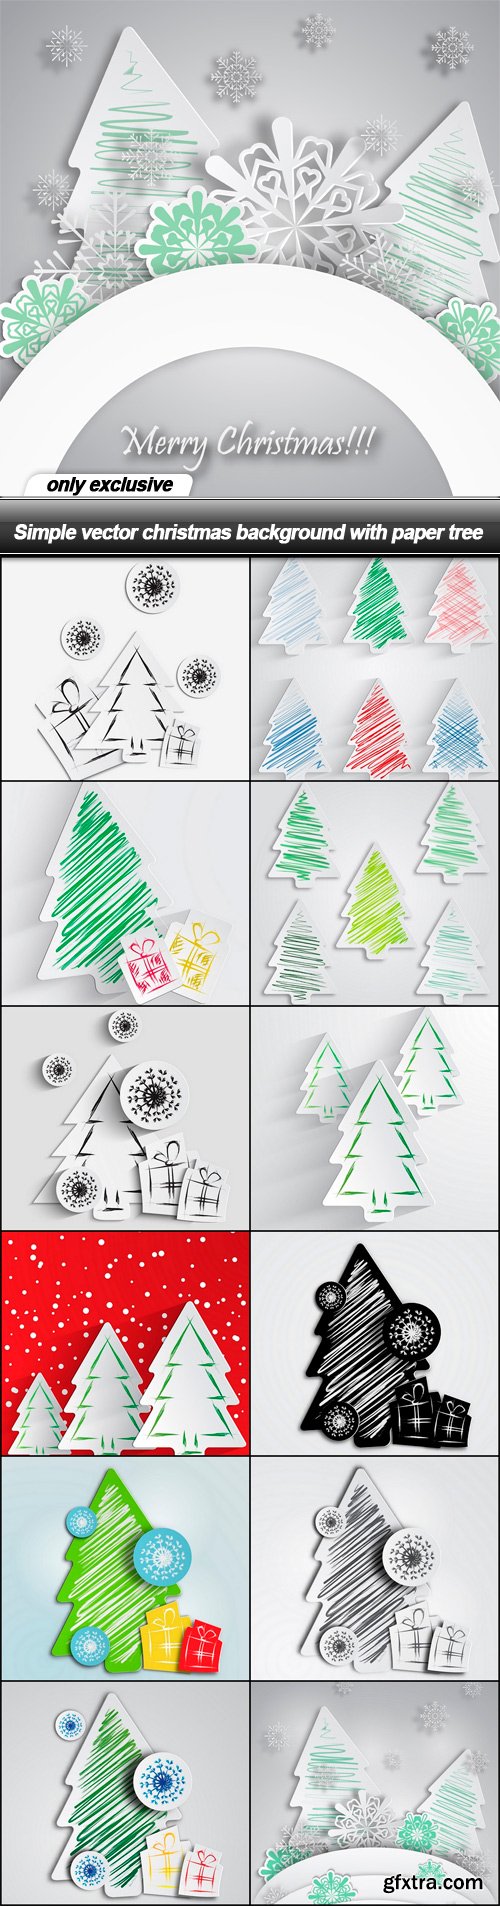 Simple vector christmas background with paper tree - 13 EPS